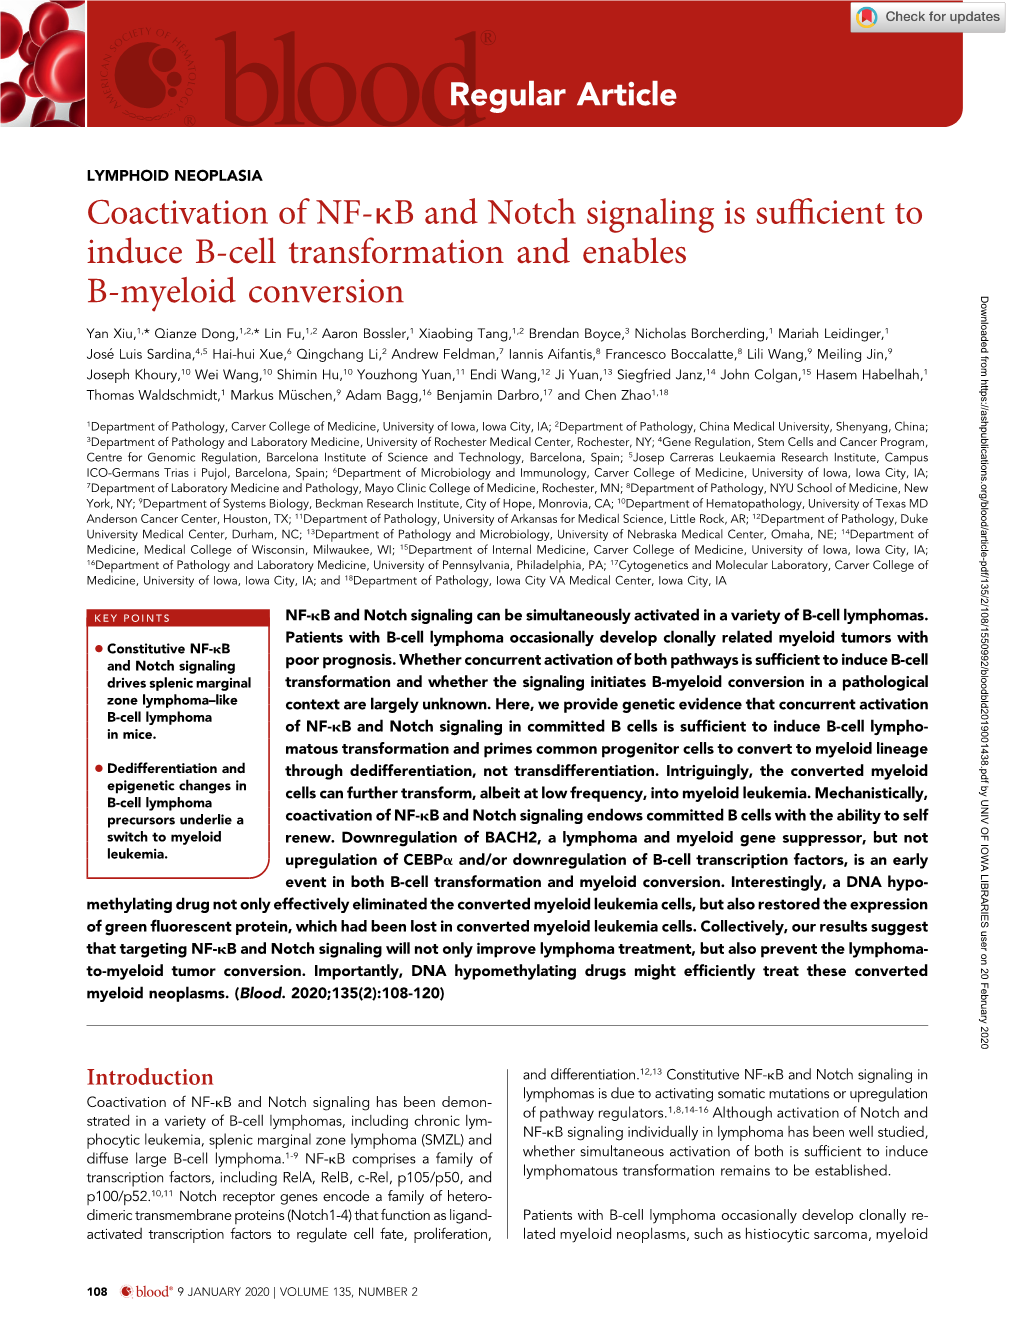 Coactivation of NF-Kb and Notch Signaling Is Sufficient to Induce B